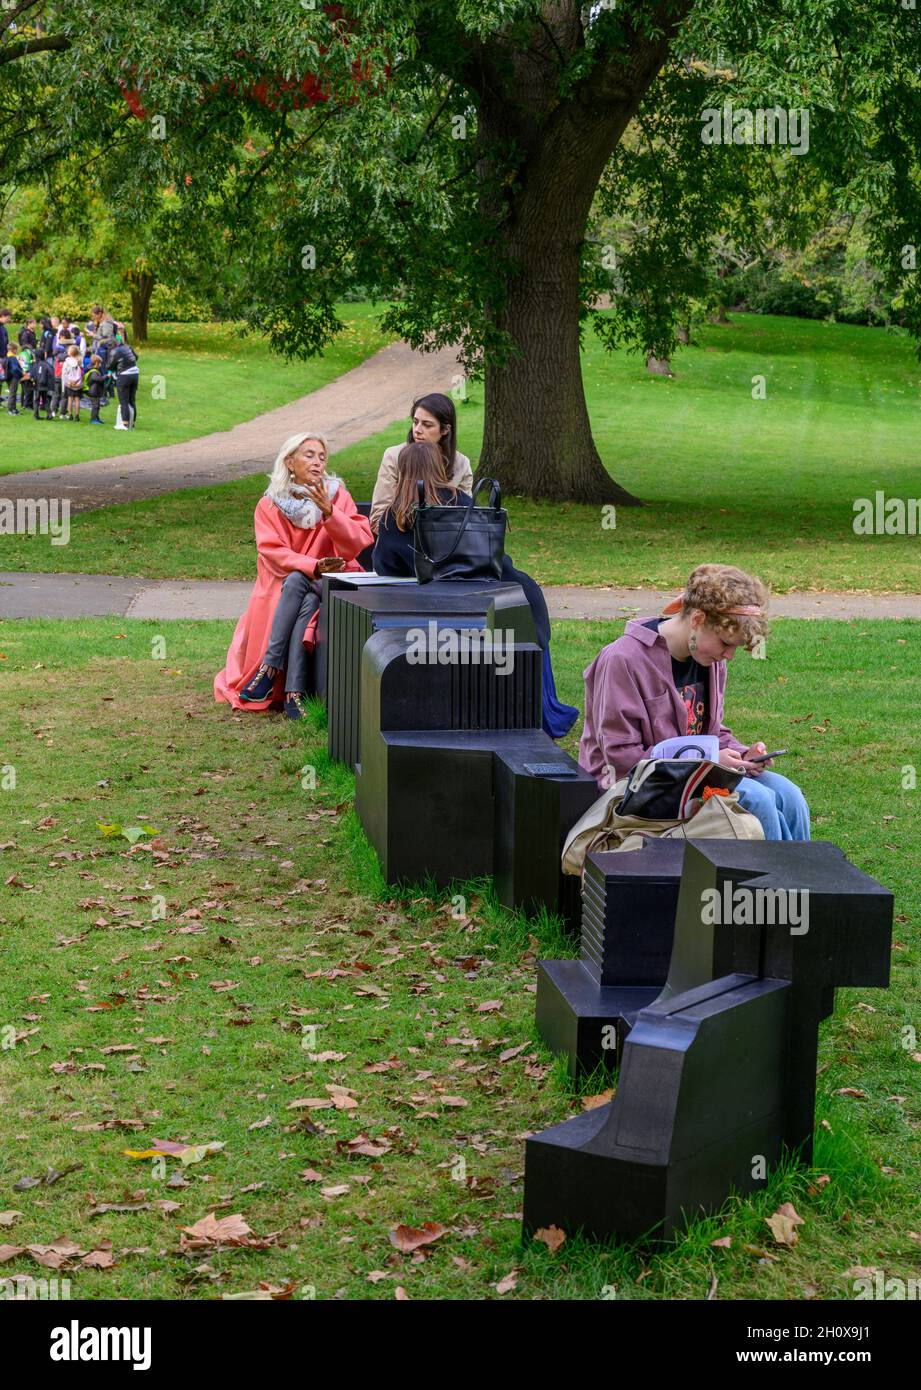 Frieze London 2021 Sculpture trail in The Regents Park. Image: Sumayya Vally, Counterspace, Serpentine Pavilion Fragment. Credit: Malcolm Park/Alamy Stock Photo